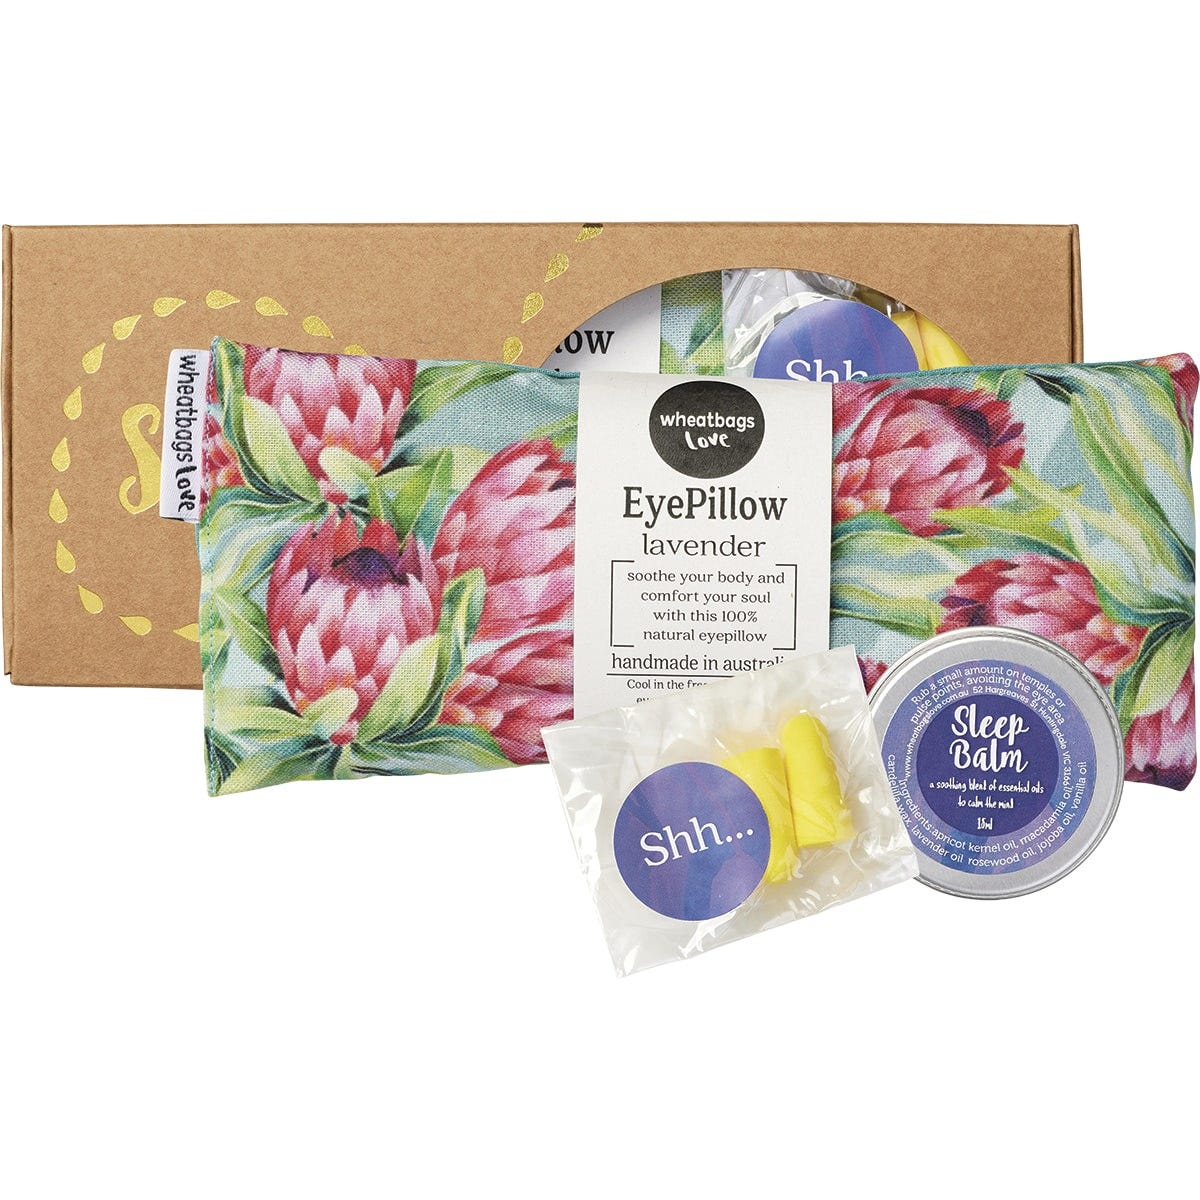 Wheatbags Love Sleep Gift Pack Protea Lavender Scented 3pk - Dr Earth - Sleep & Relax